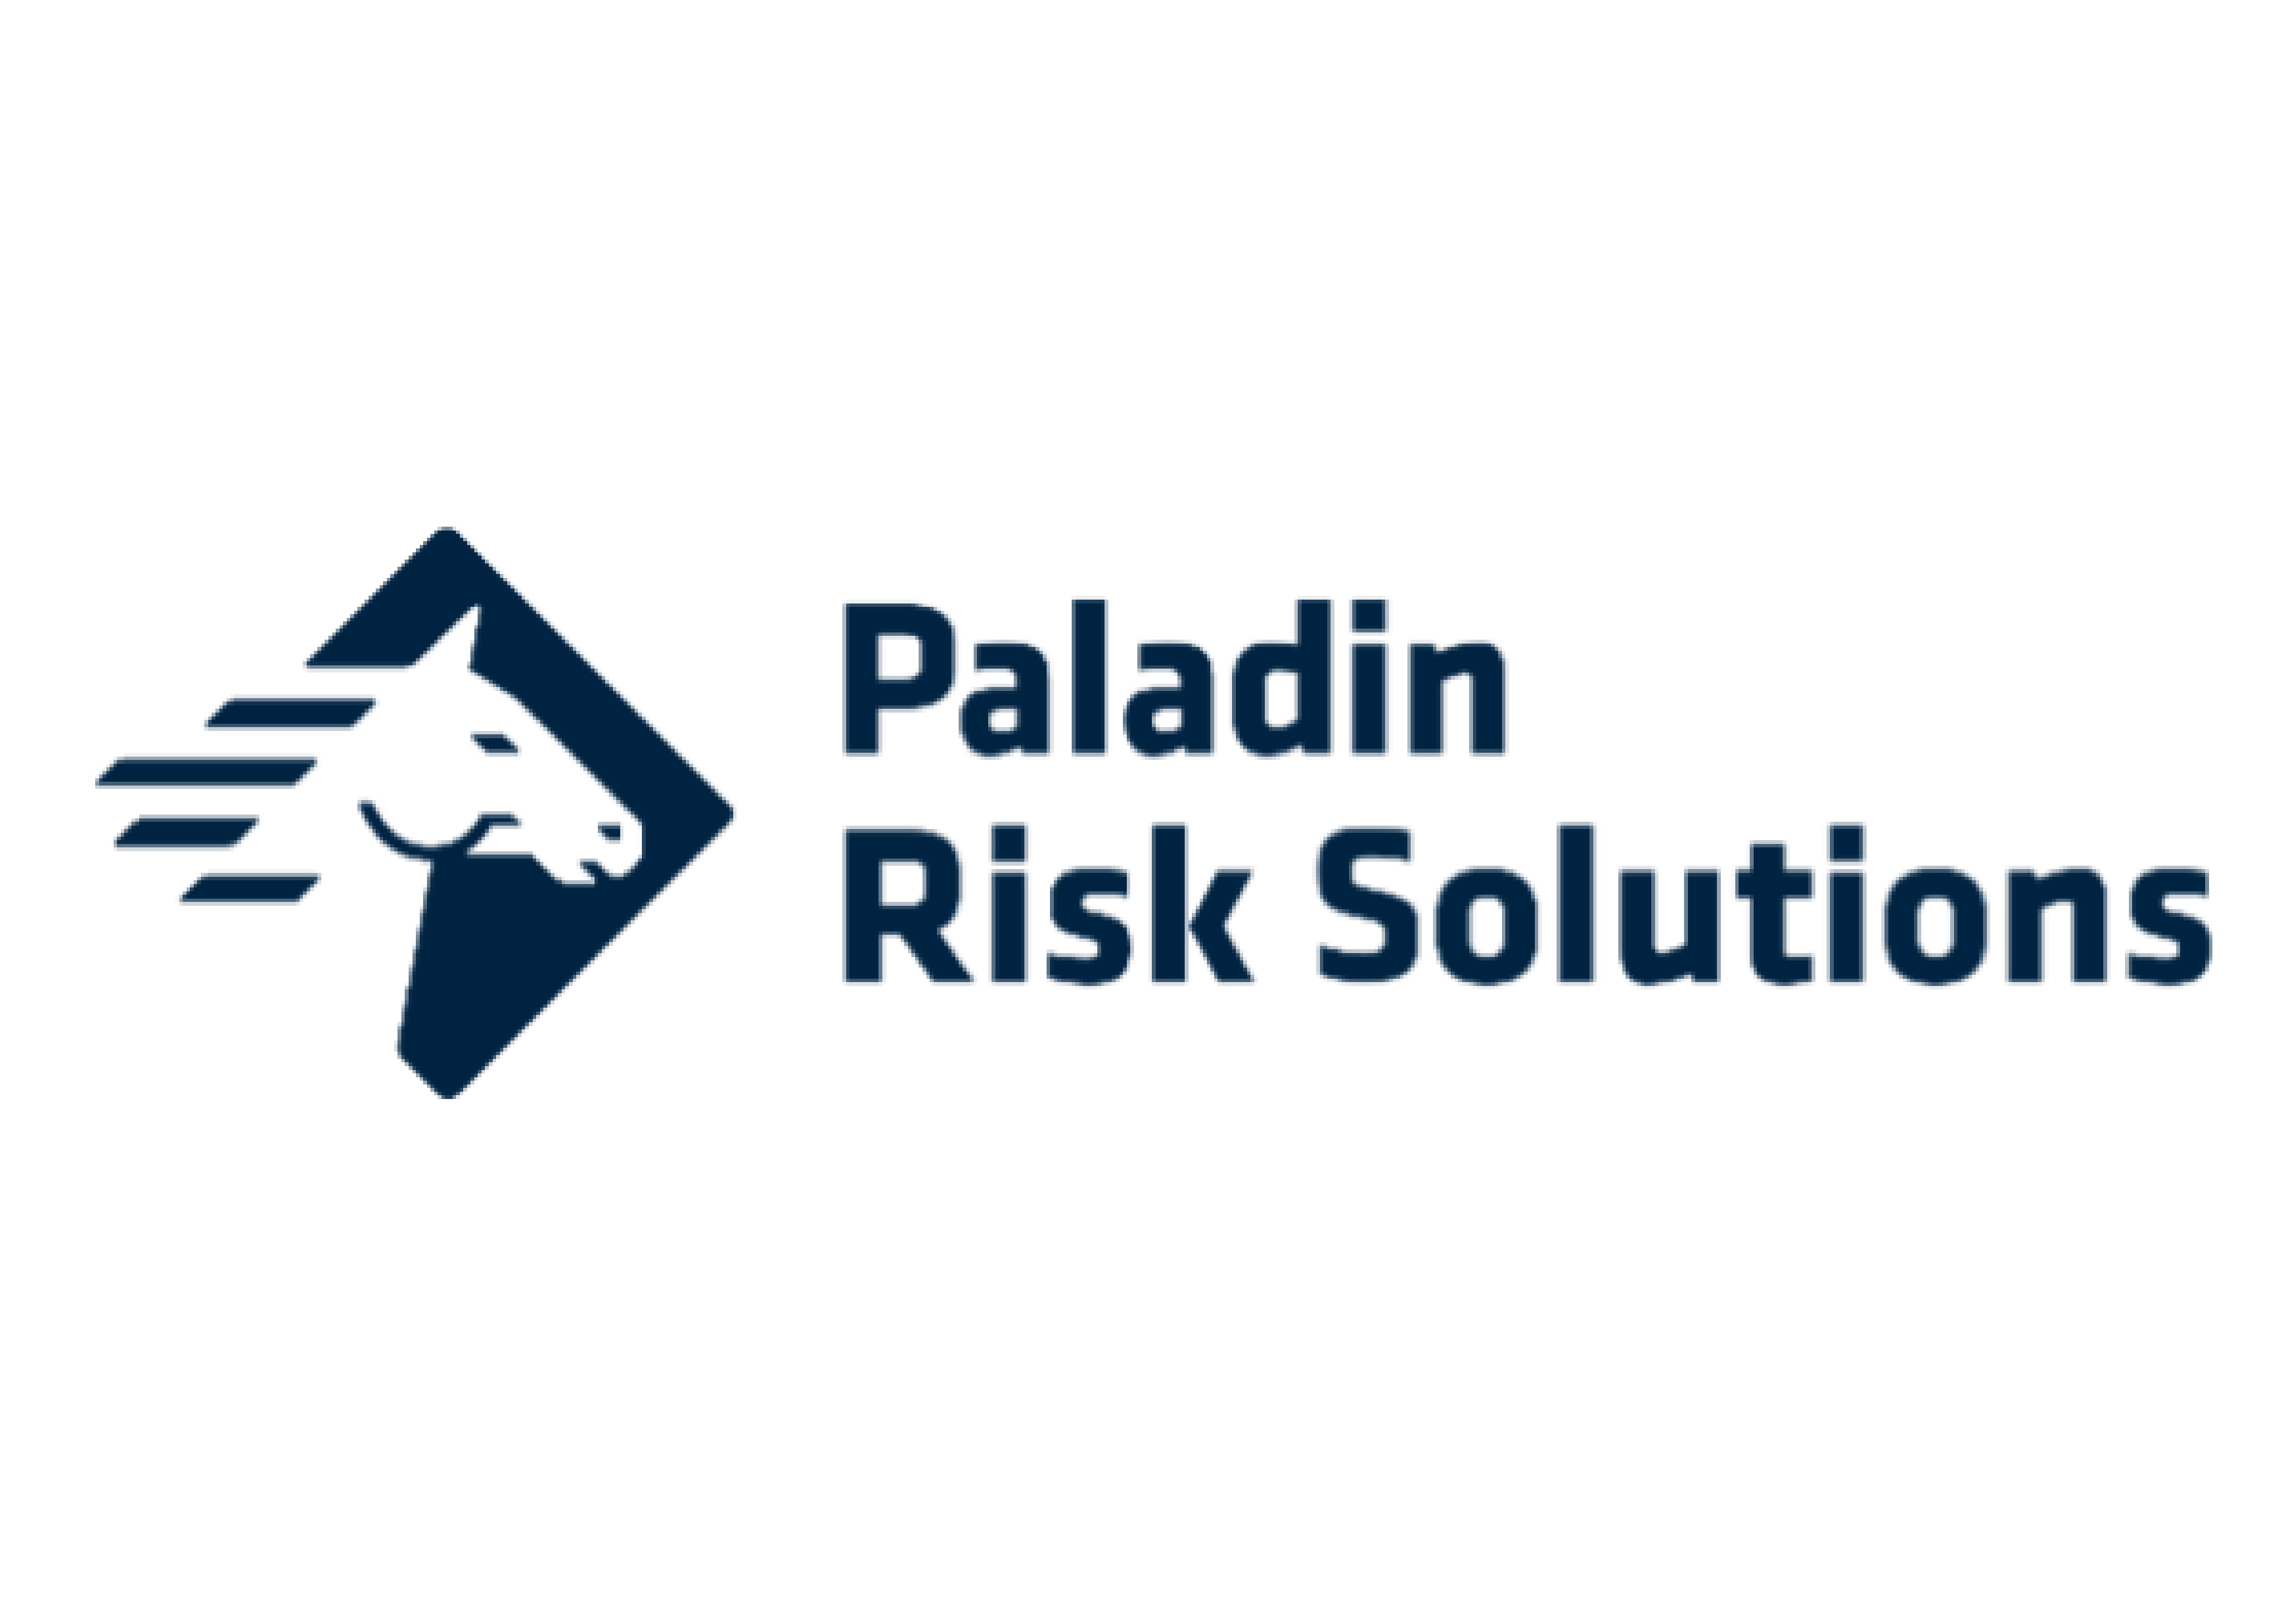 https://www.paladinsecurity.com/wp-content/uploads/2021/05/PRSI-01.png